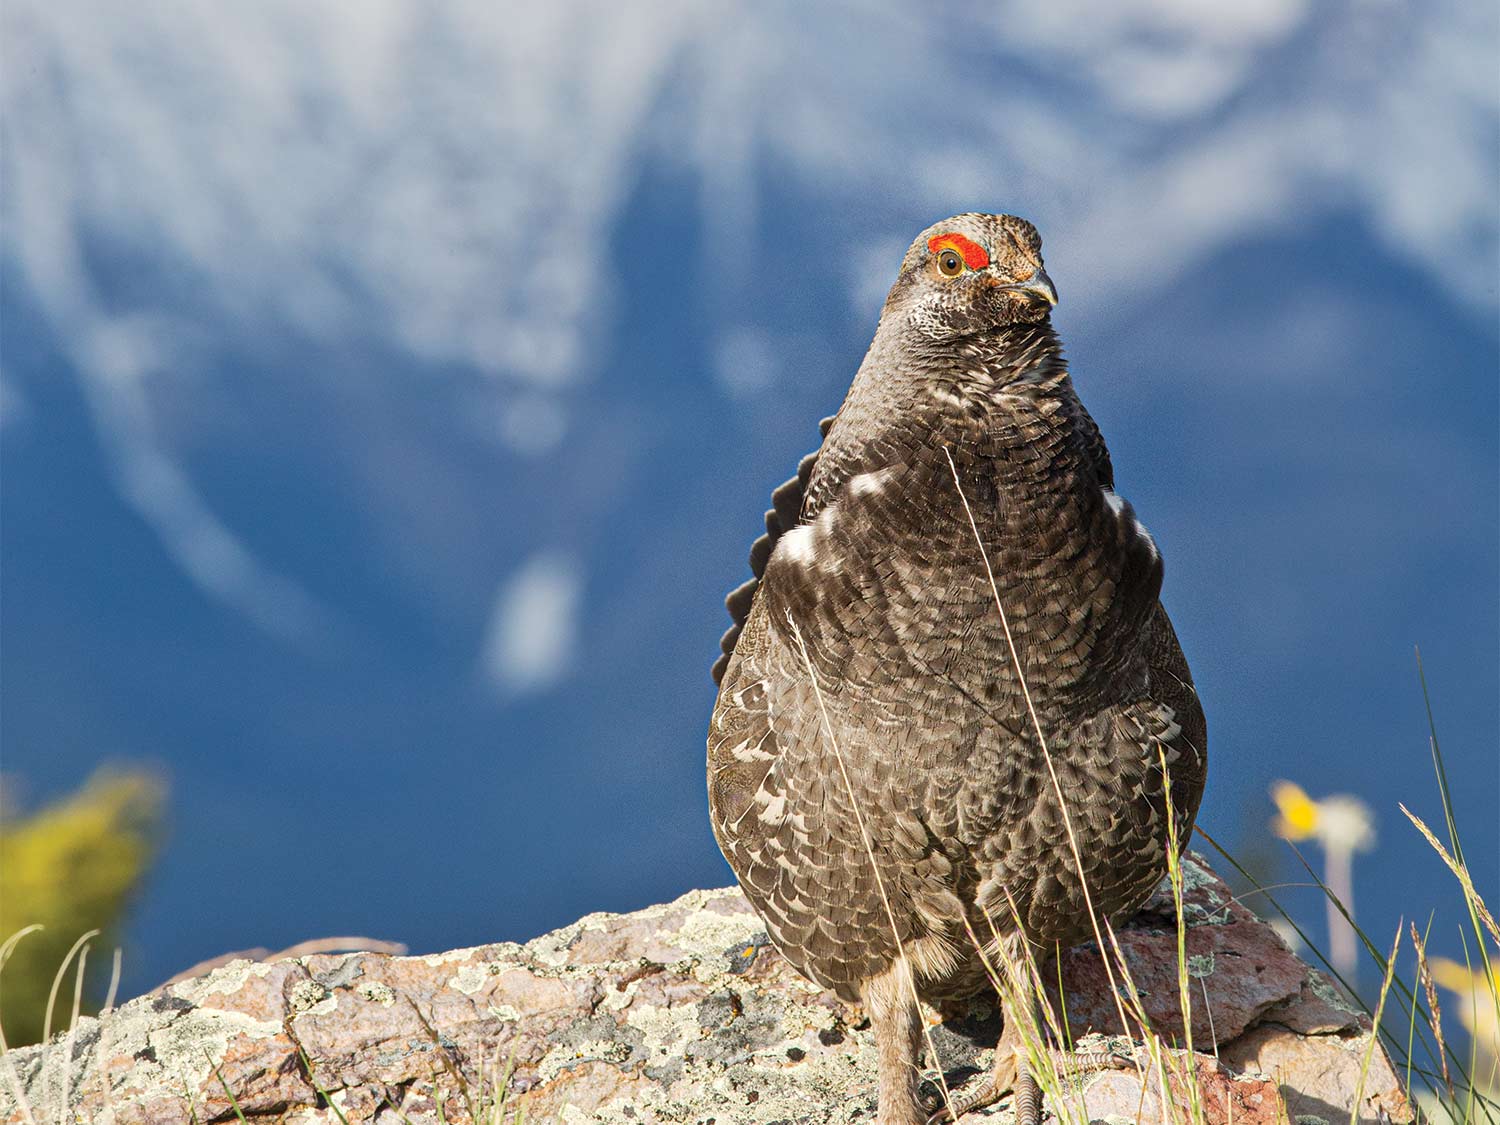 A sooty grouse sitting on a rock.